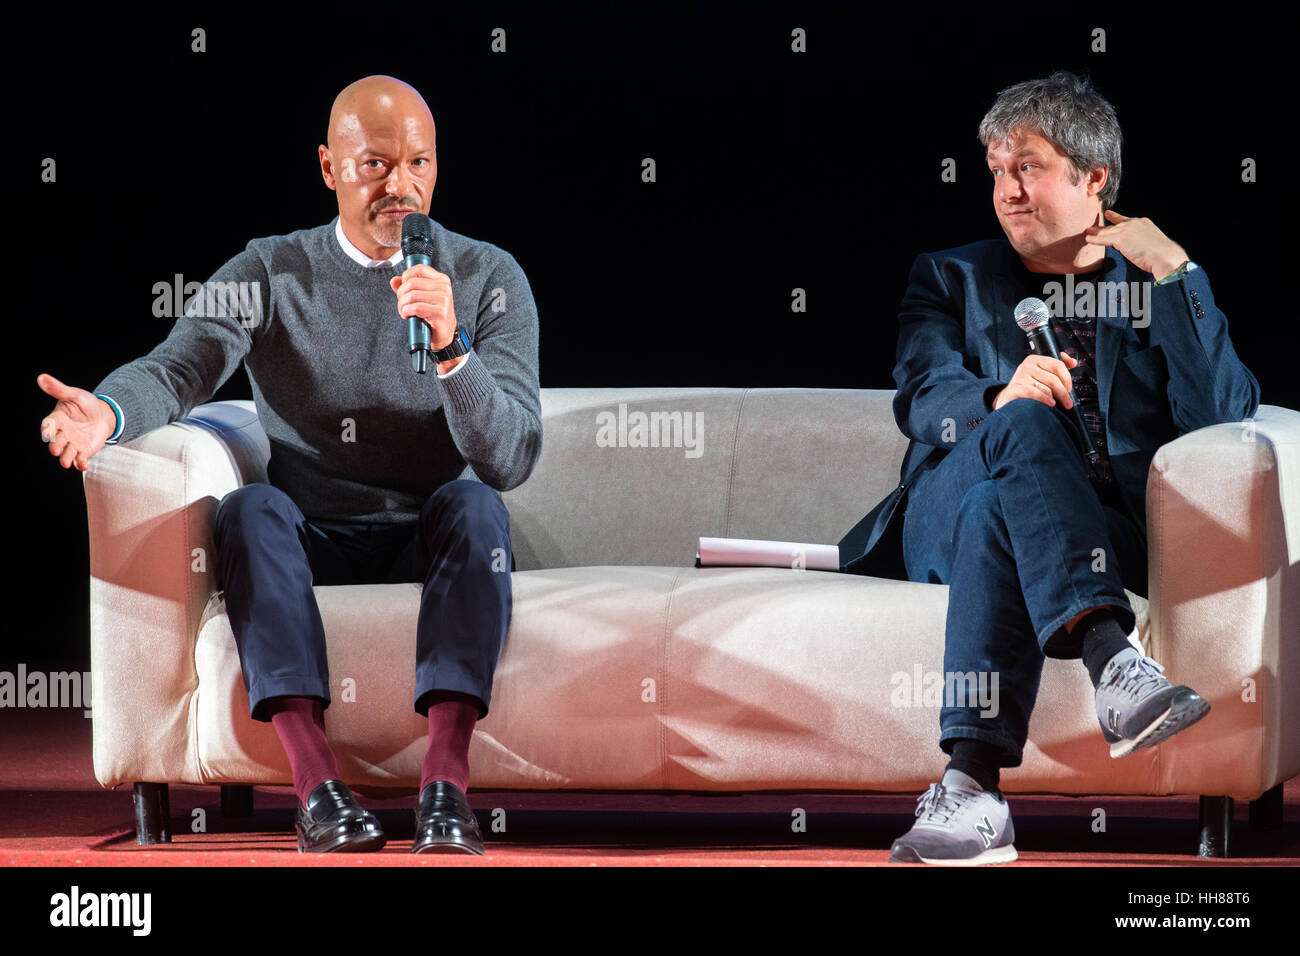 Moscow, Russia. 17th Jan, 2017. Film director Fyodor Bondarchuk(left) and film critic Anton Dolin(right) at the lecture "The attraction: Under the sign of secrecy" in the cinema "October". Credit: Victor Vytolskiy/Alamy Live News Stock Photo